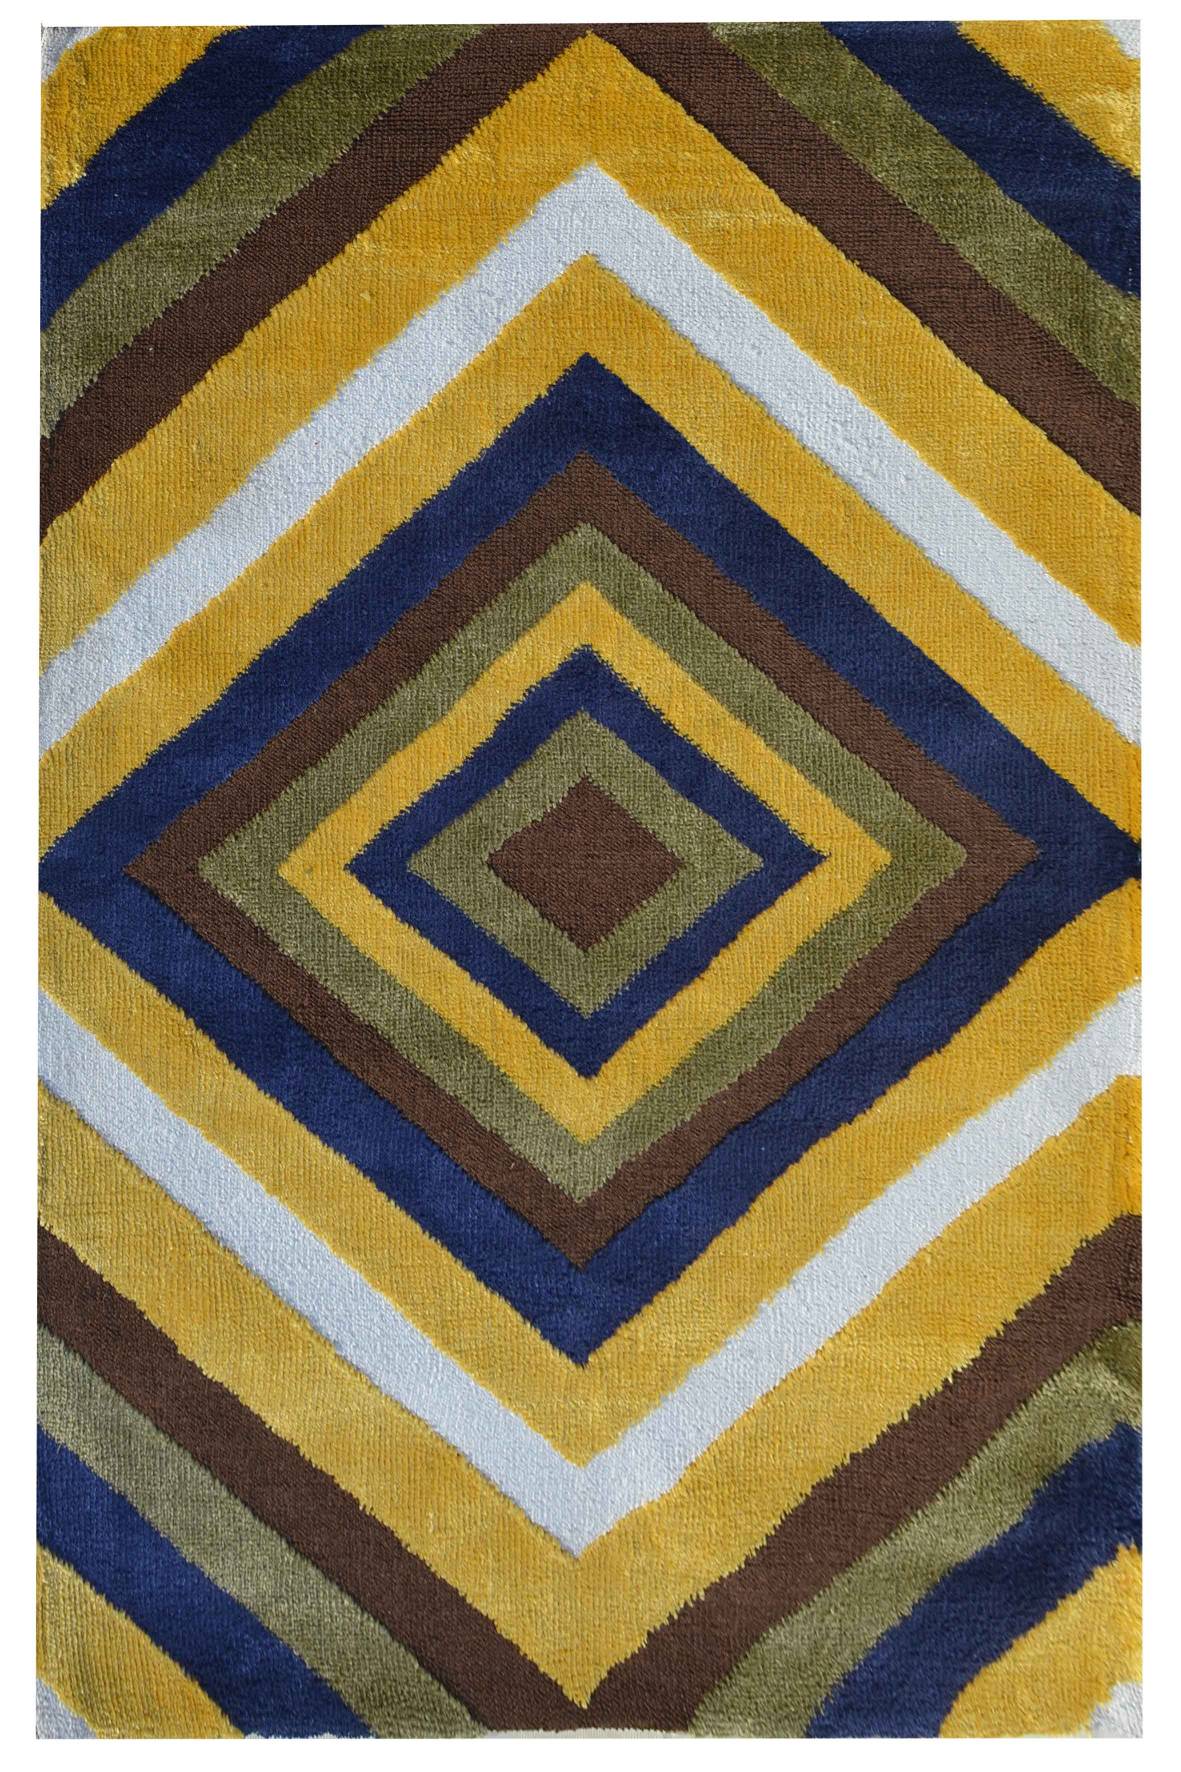 Detec™ Presto Hand Tufted Abstract Patterned Polyester Carpet